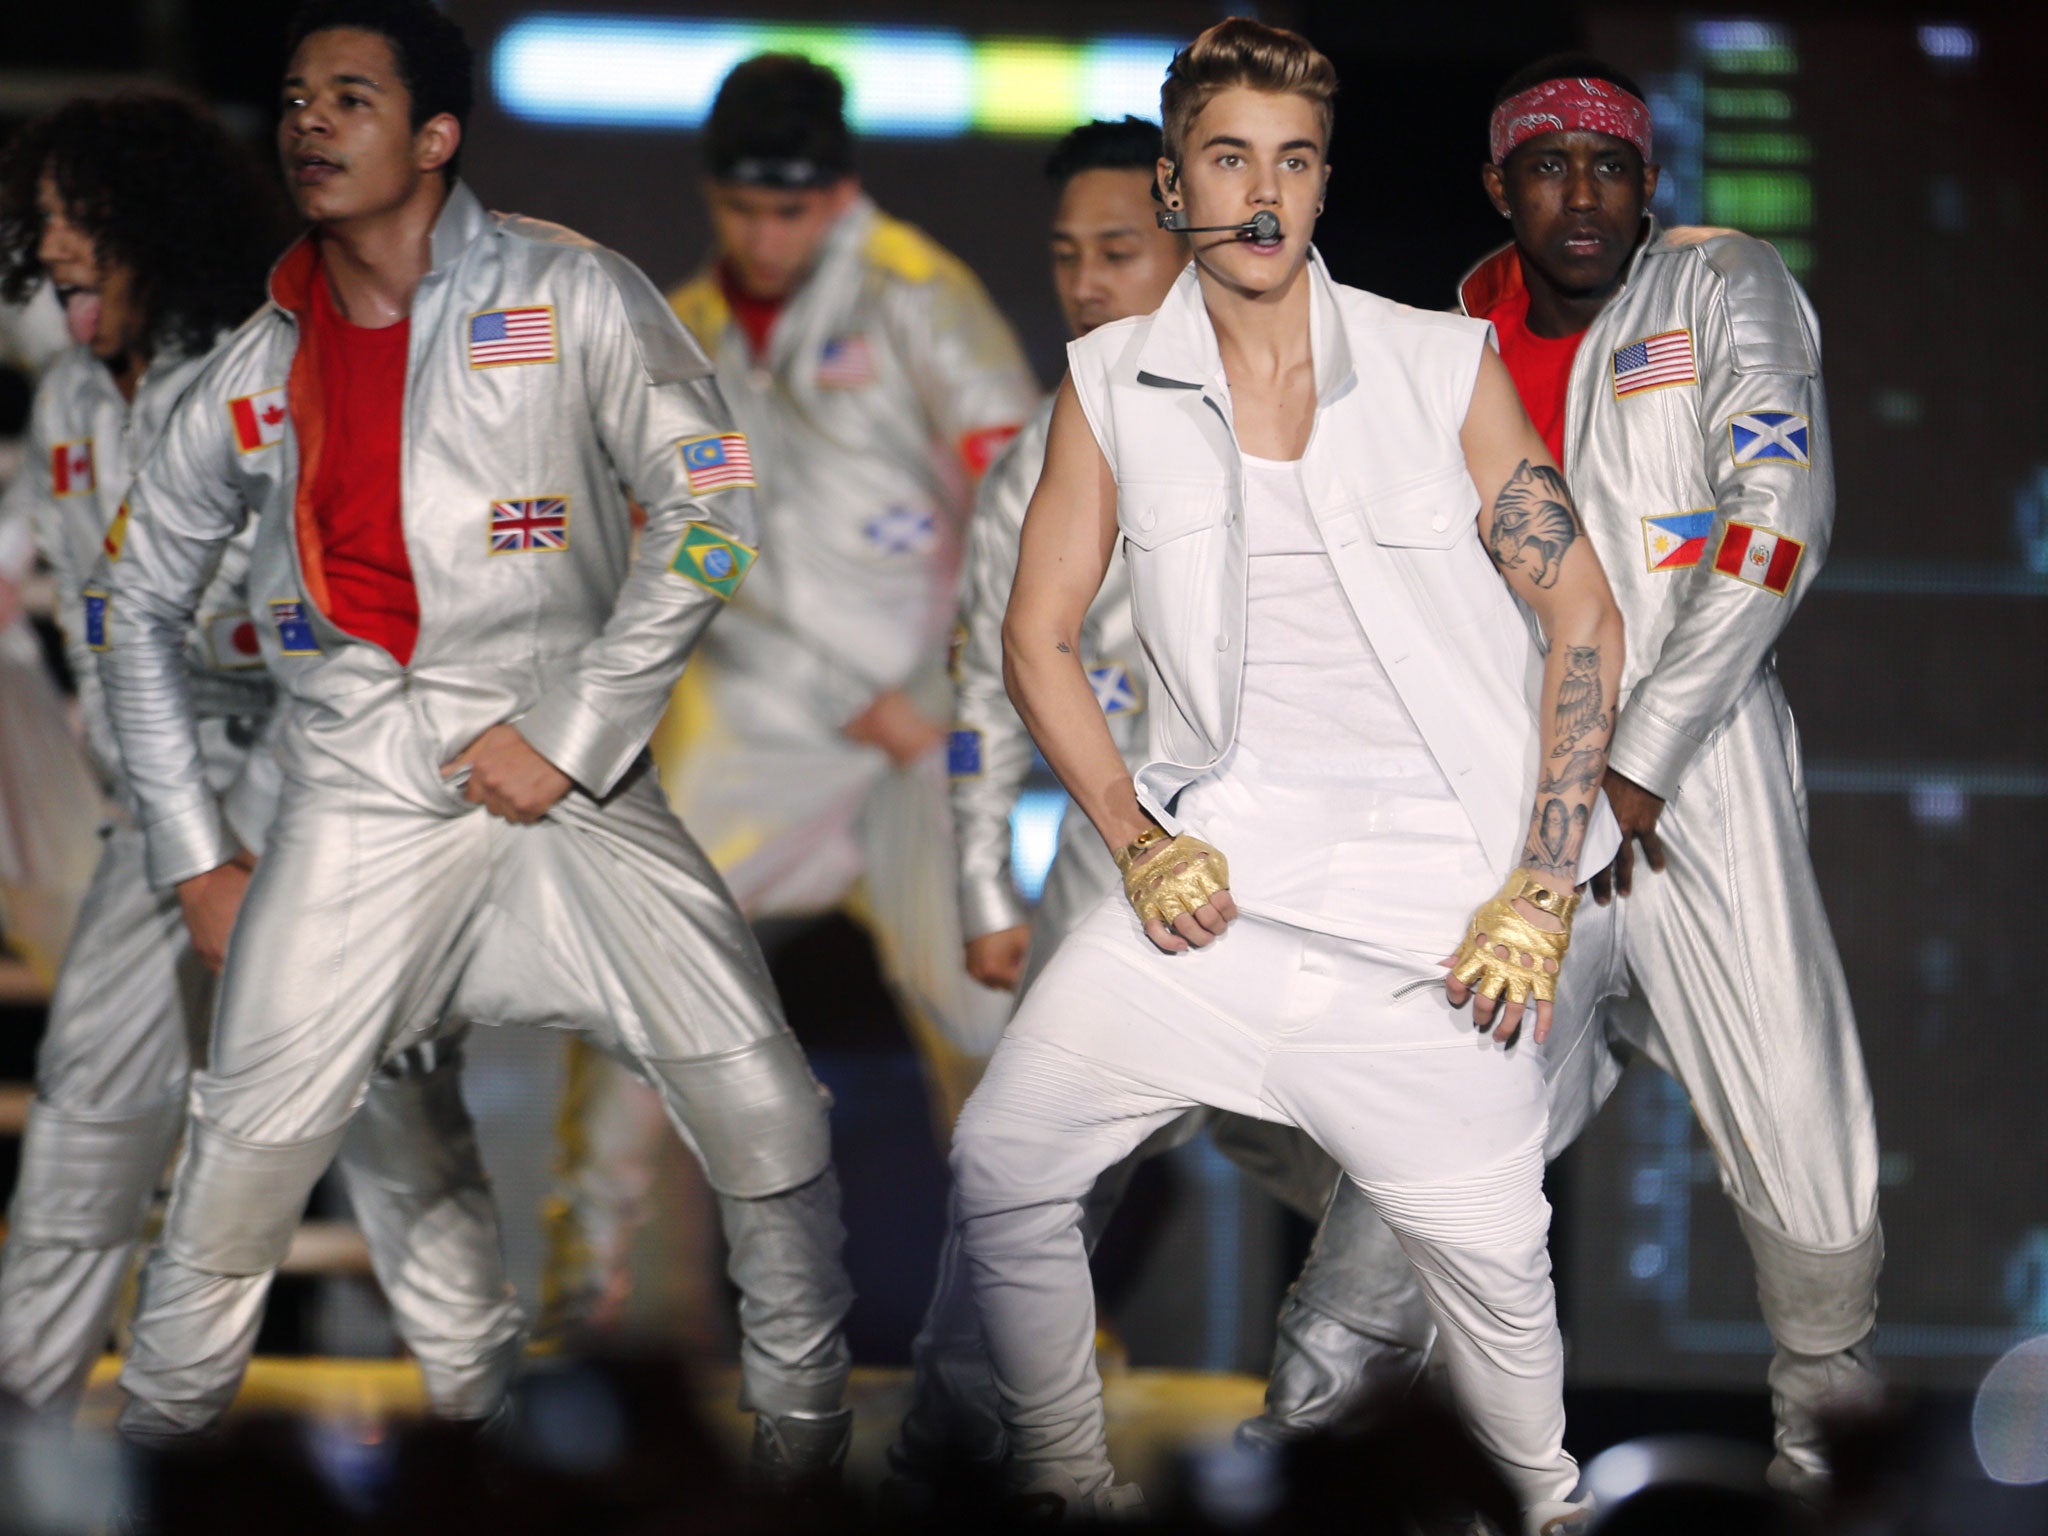 Justin Bieber performing in his 'Believe' world tour